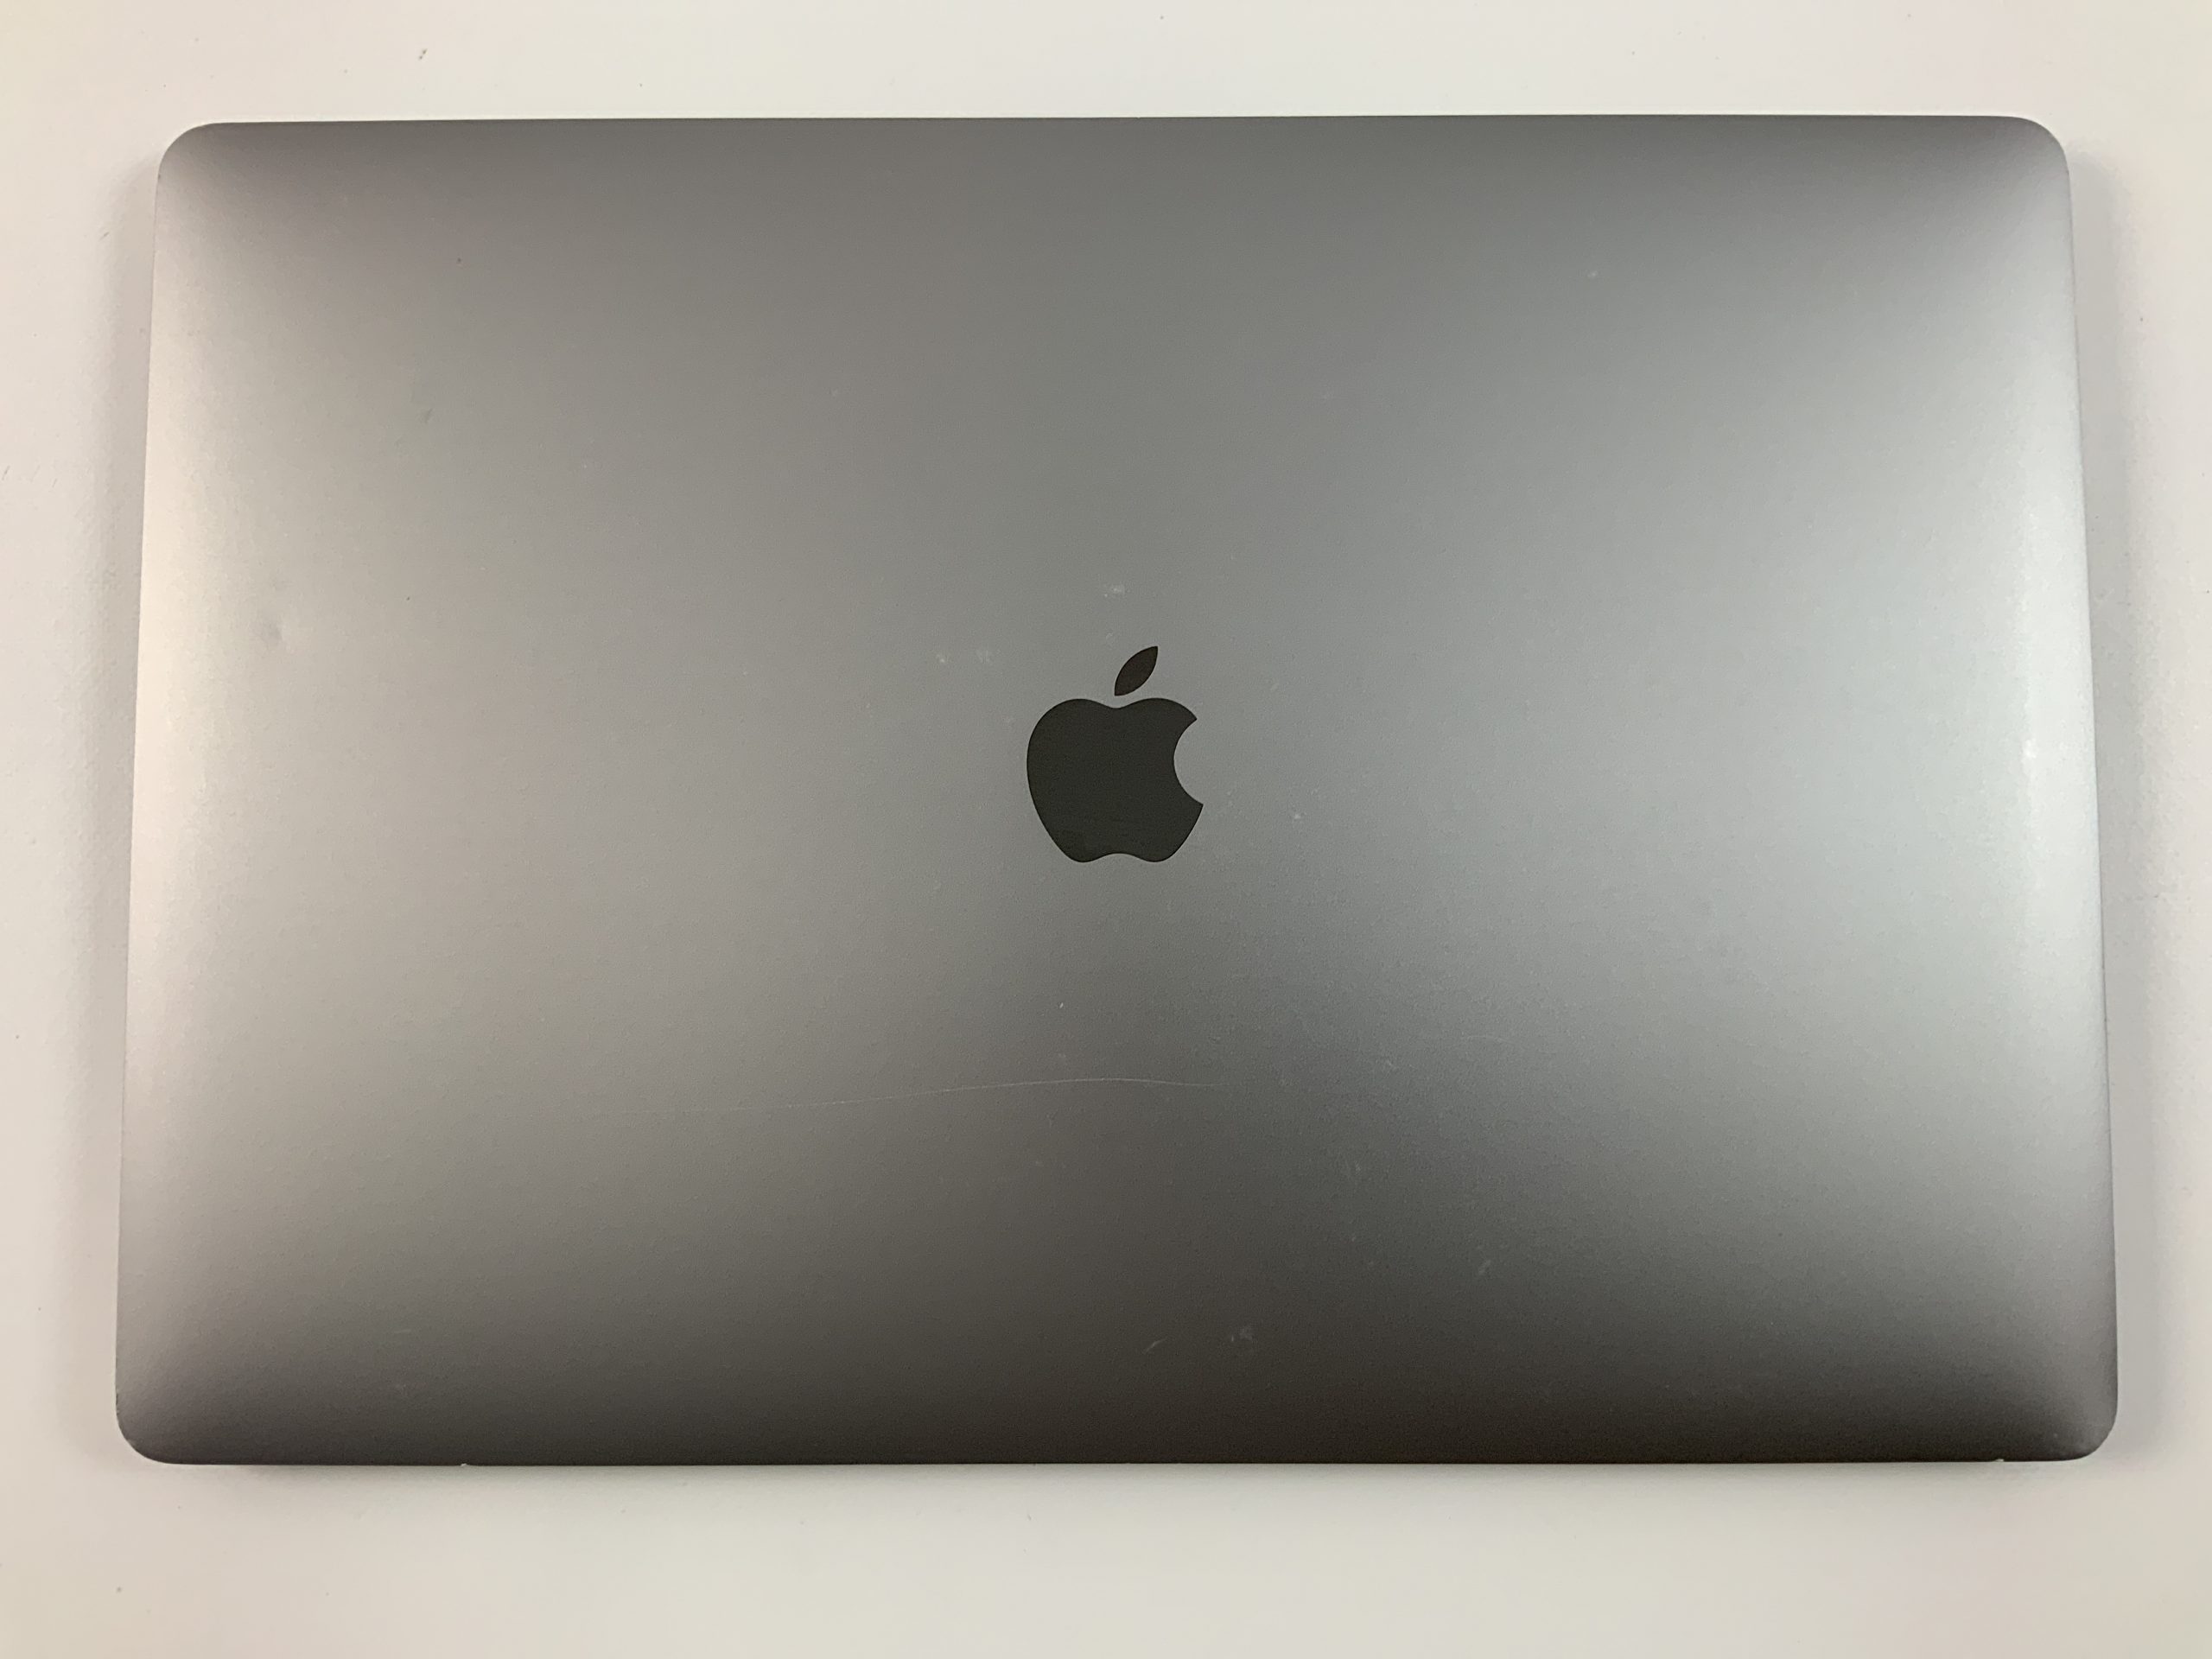 MacBook Pro 15" Touch Bar Mid 2018 (Intel 6-Core i7 2.6 GHz 16 GB RAM 512 GB SSD), Space Gray, Intel 6-Core i7 2.6 GHz, 16 GB RAM, 512 GB SSD, Afbeelding 4